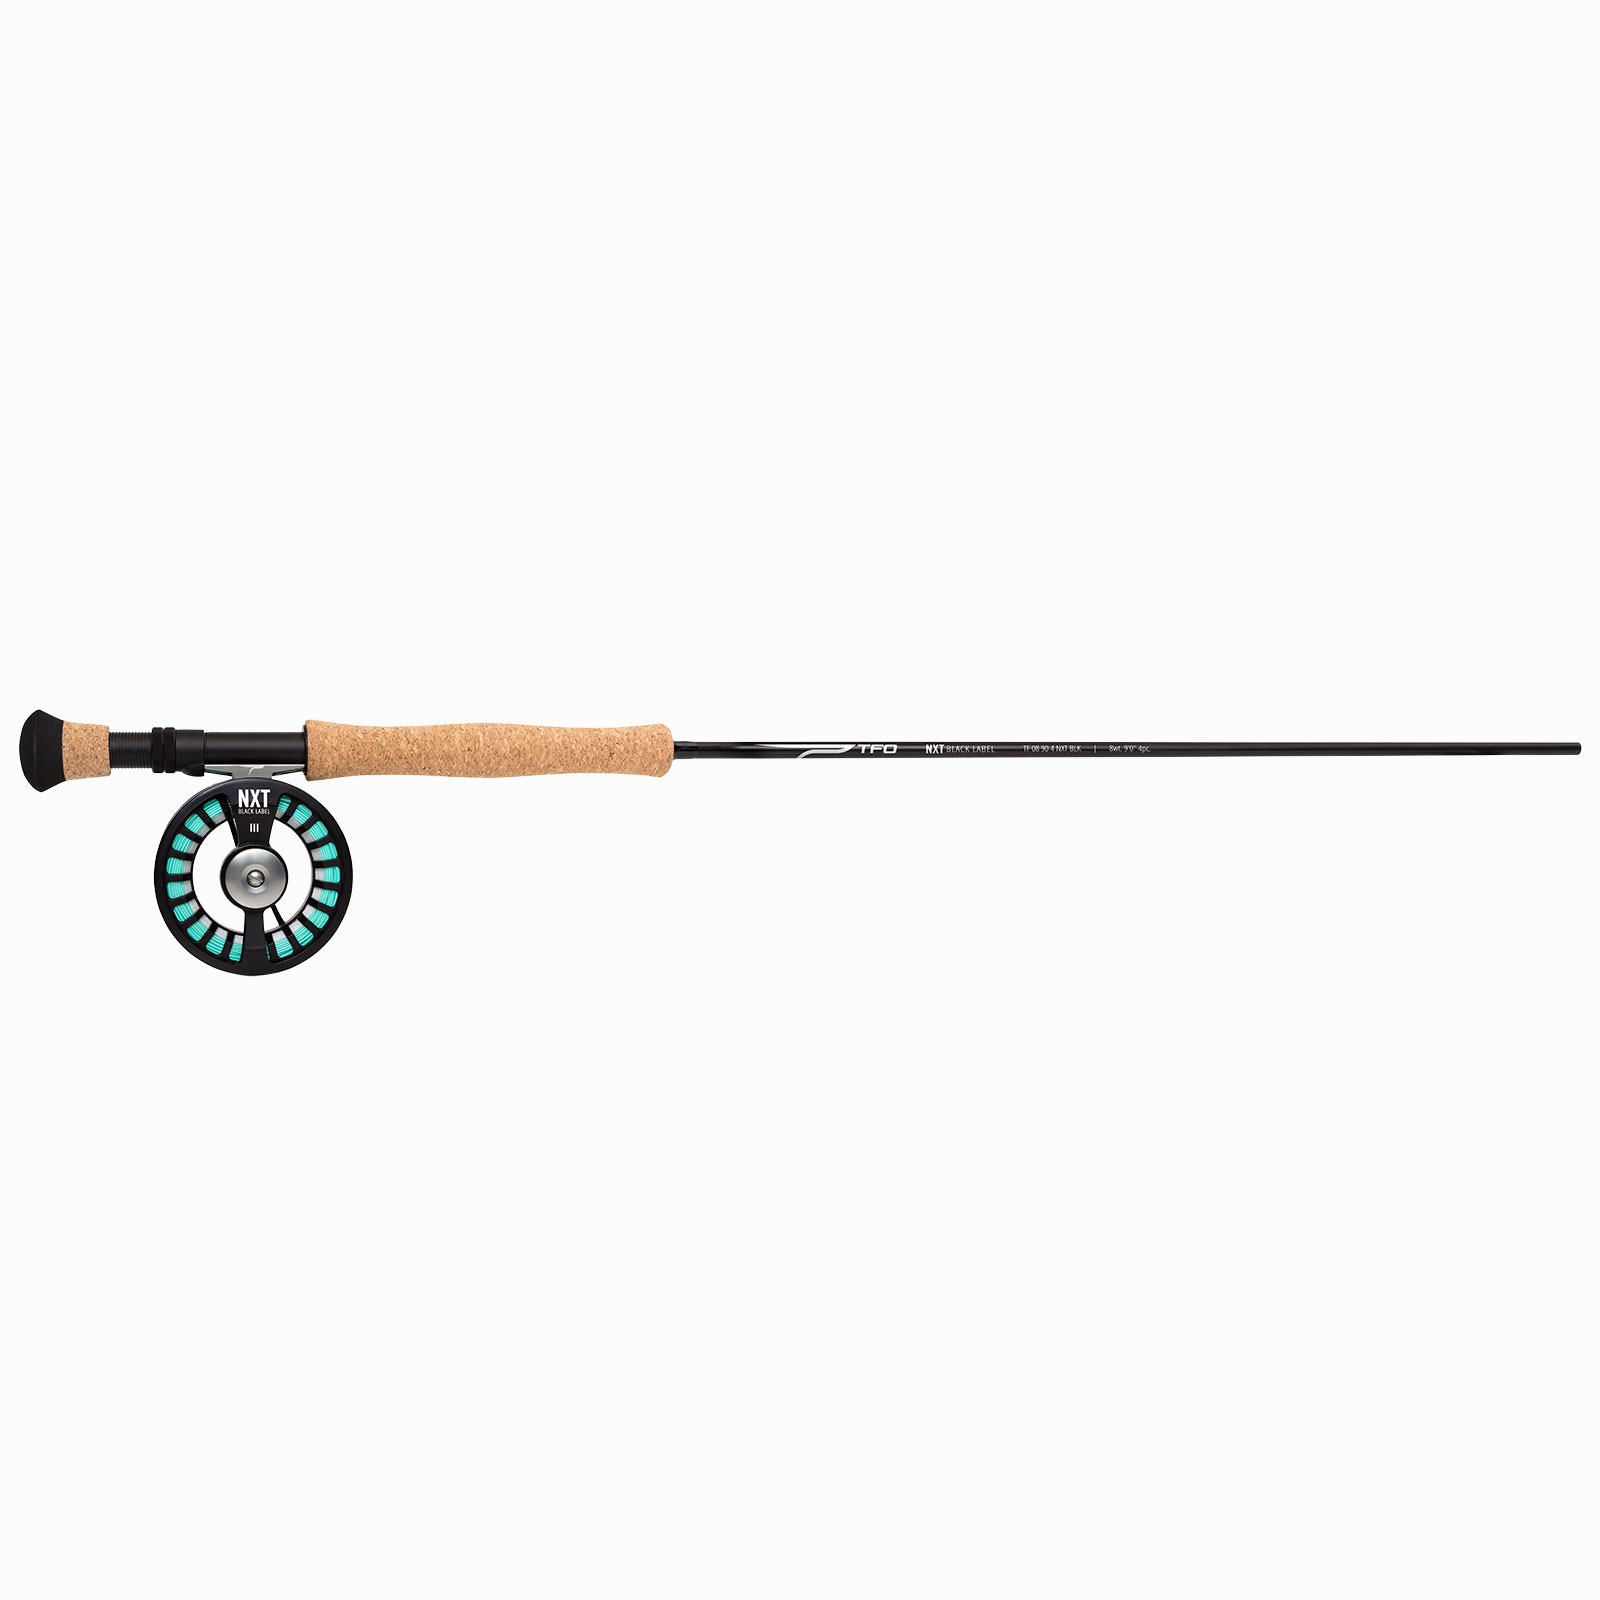 TFO NXT Black Label Combo fly rod and Reel Kit - AvidMax